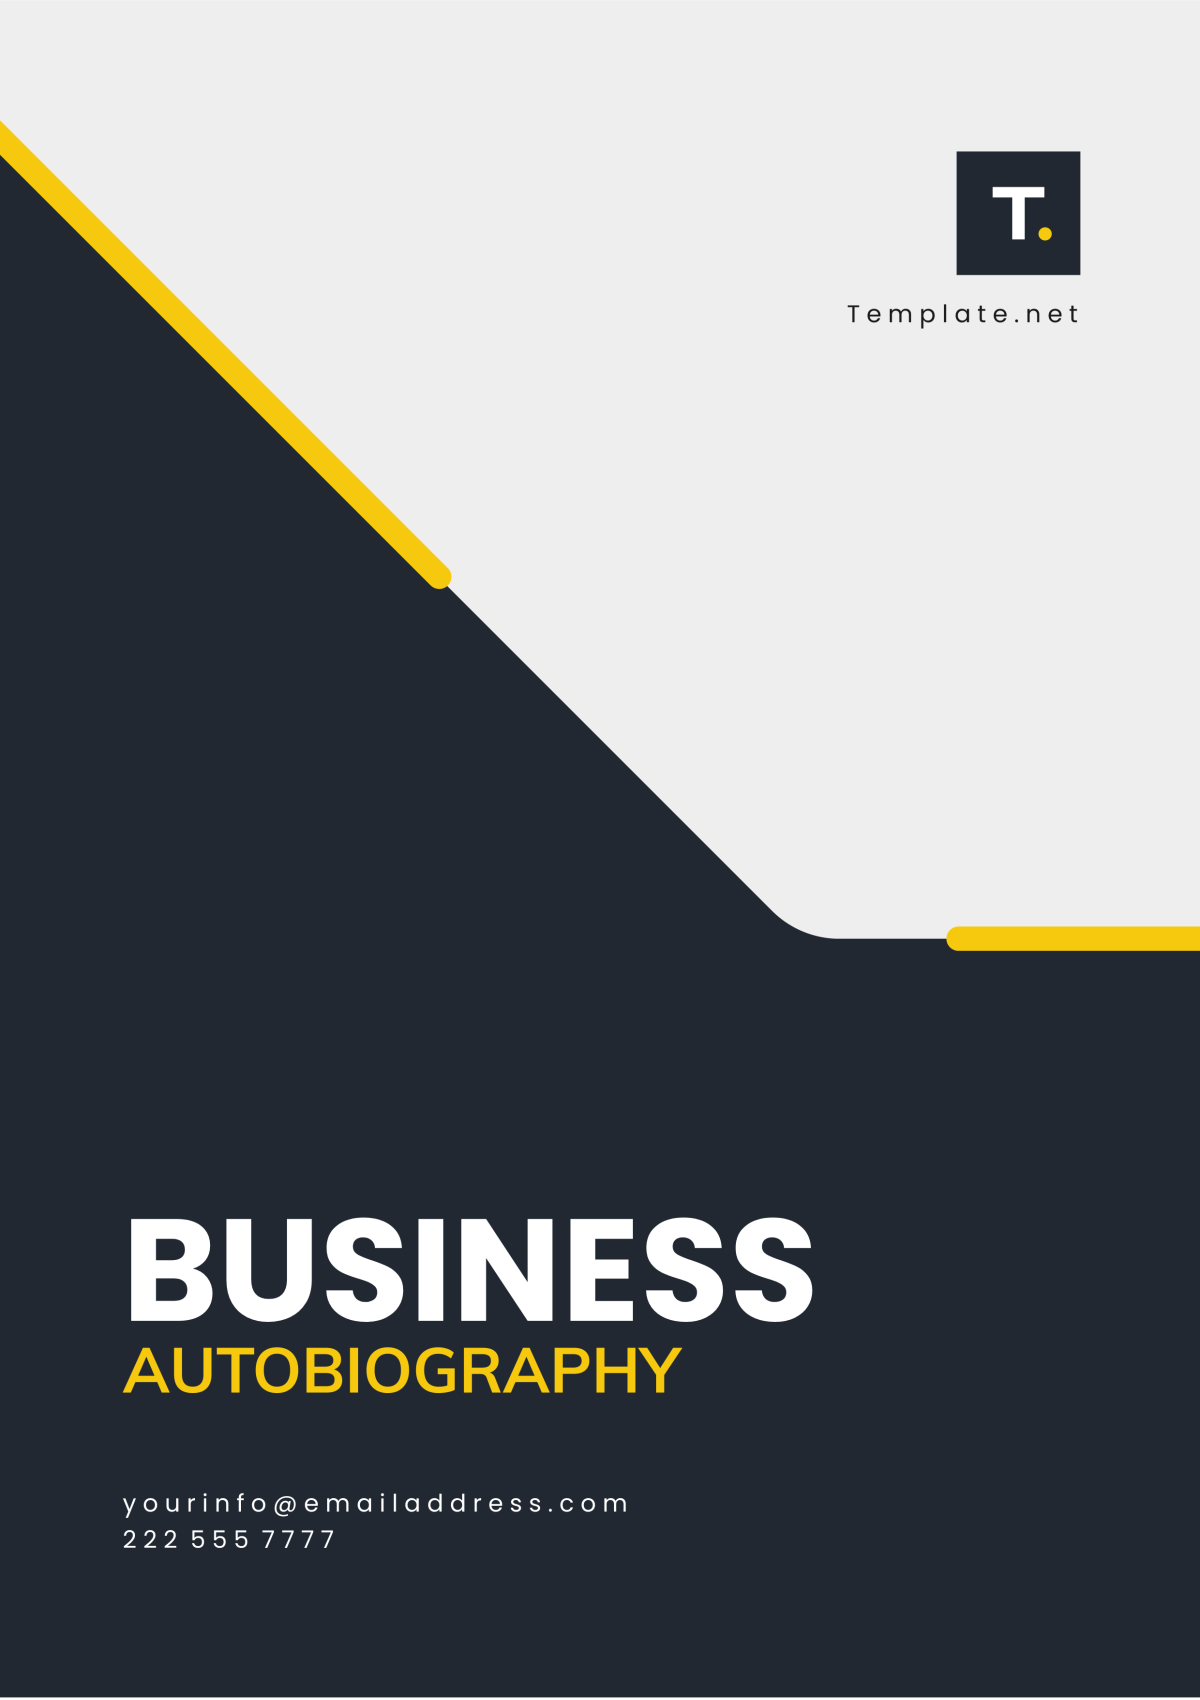 Free Business Autobiography Template